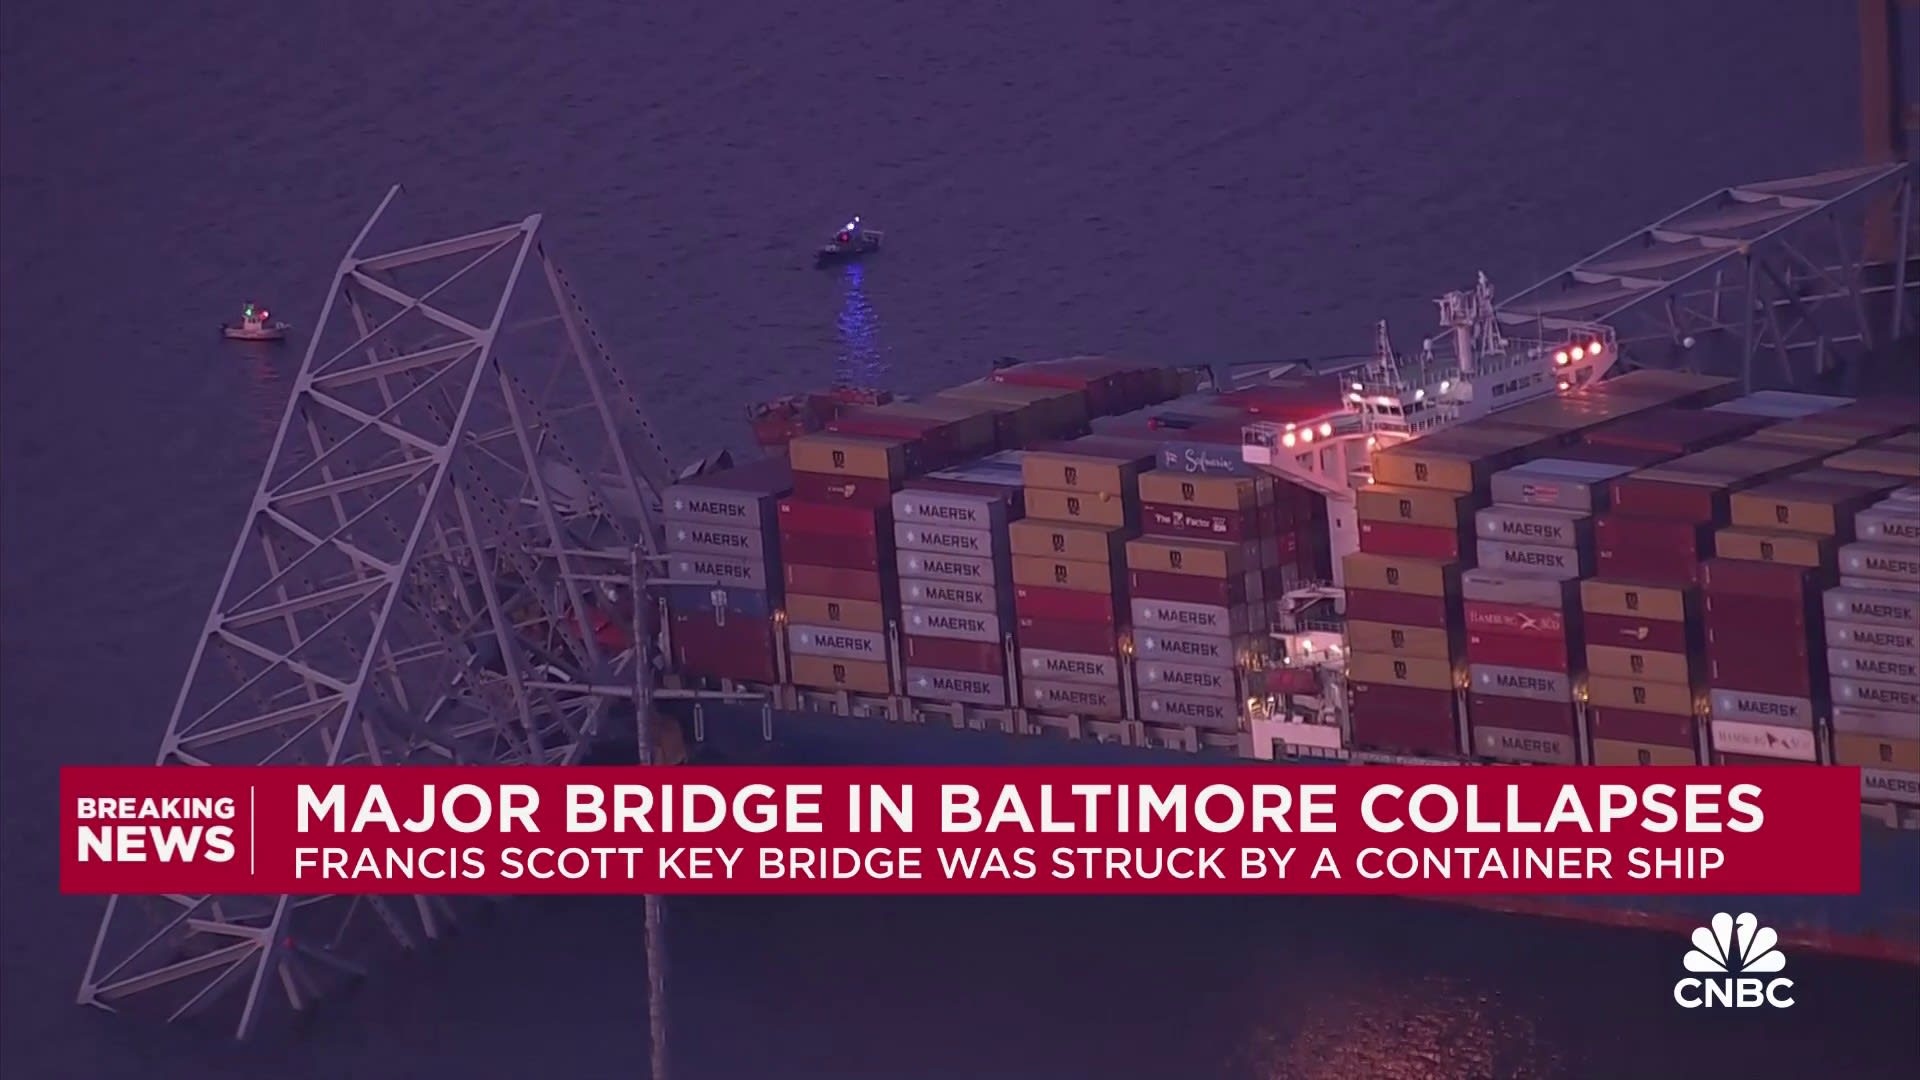 Major bridge in Baltimore collapses: Here's what to know